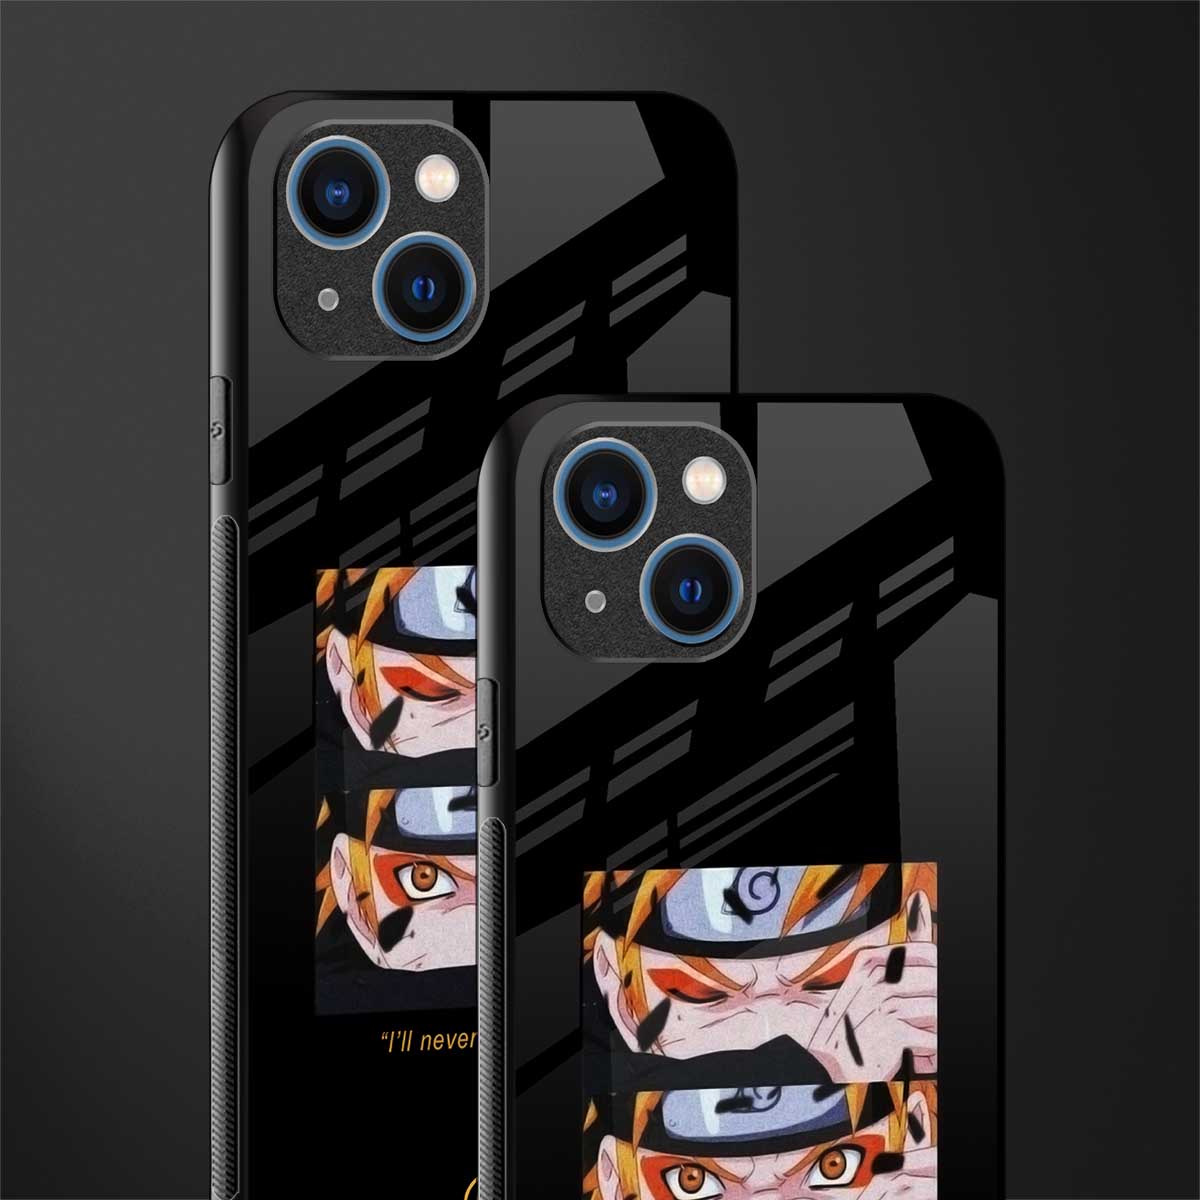 Buy Anime Iphone 11 Case Online In India  Etsy India